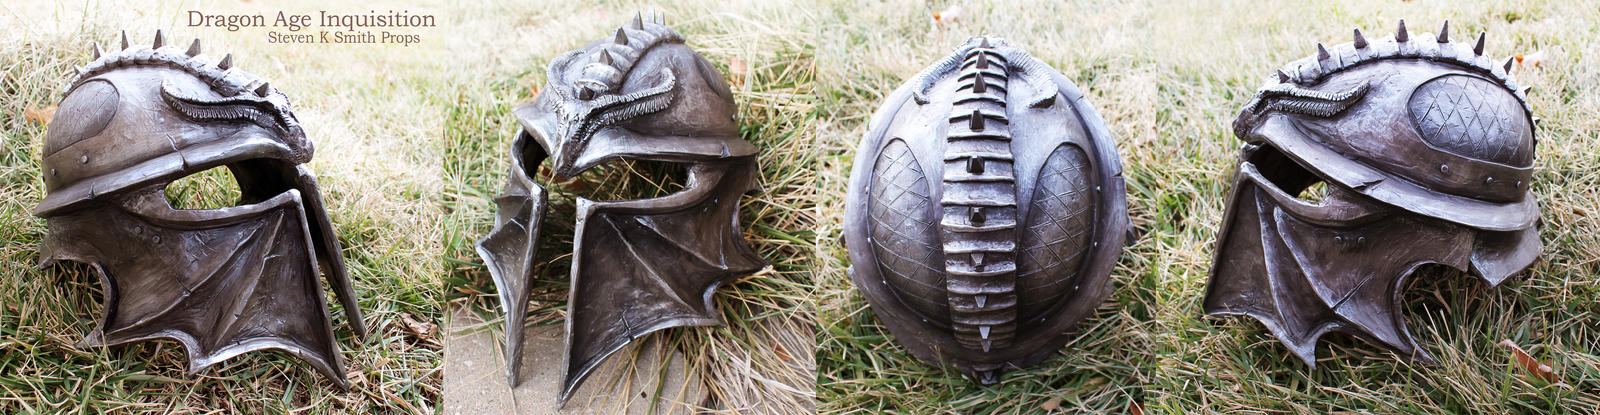 dragon_age_inquisition_helmet___full_view_by_captainhask-d6yr8ku.jpg